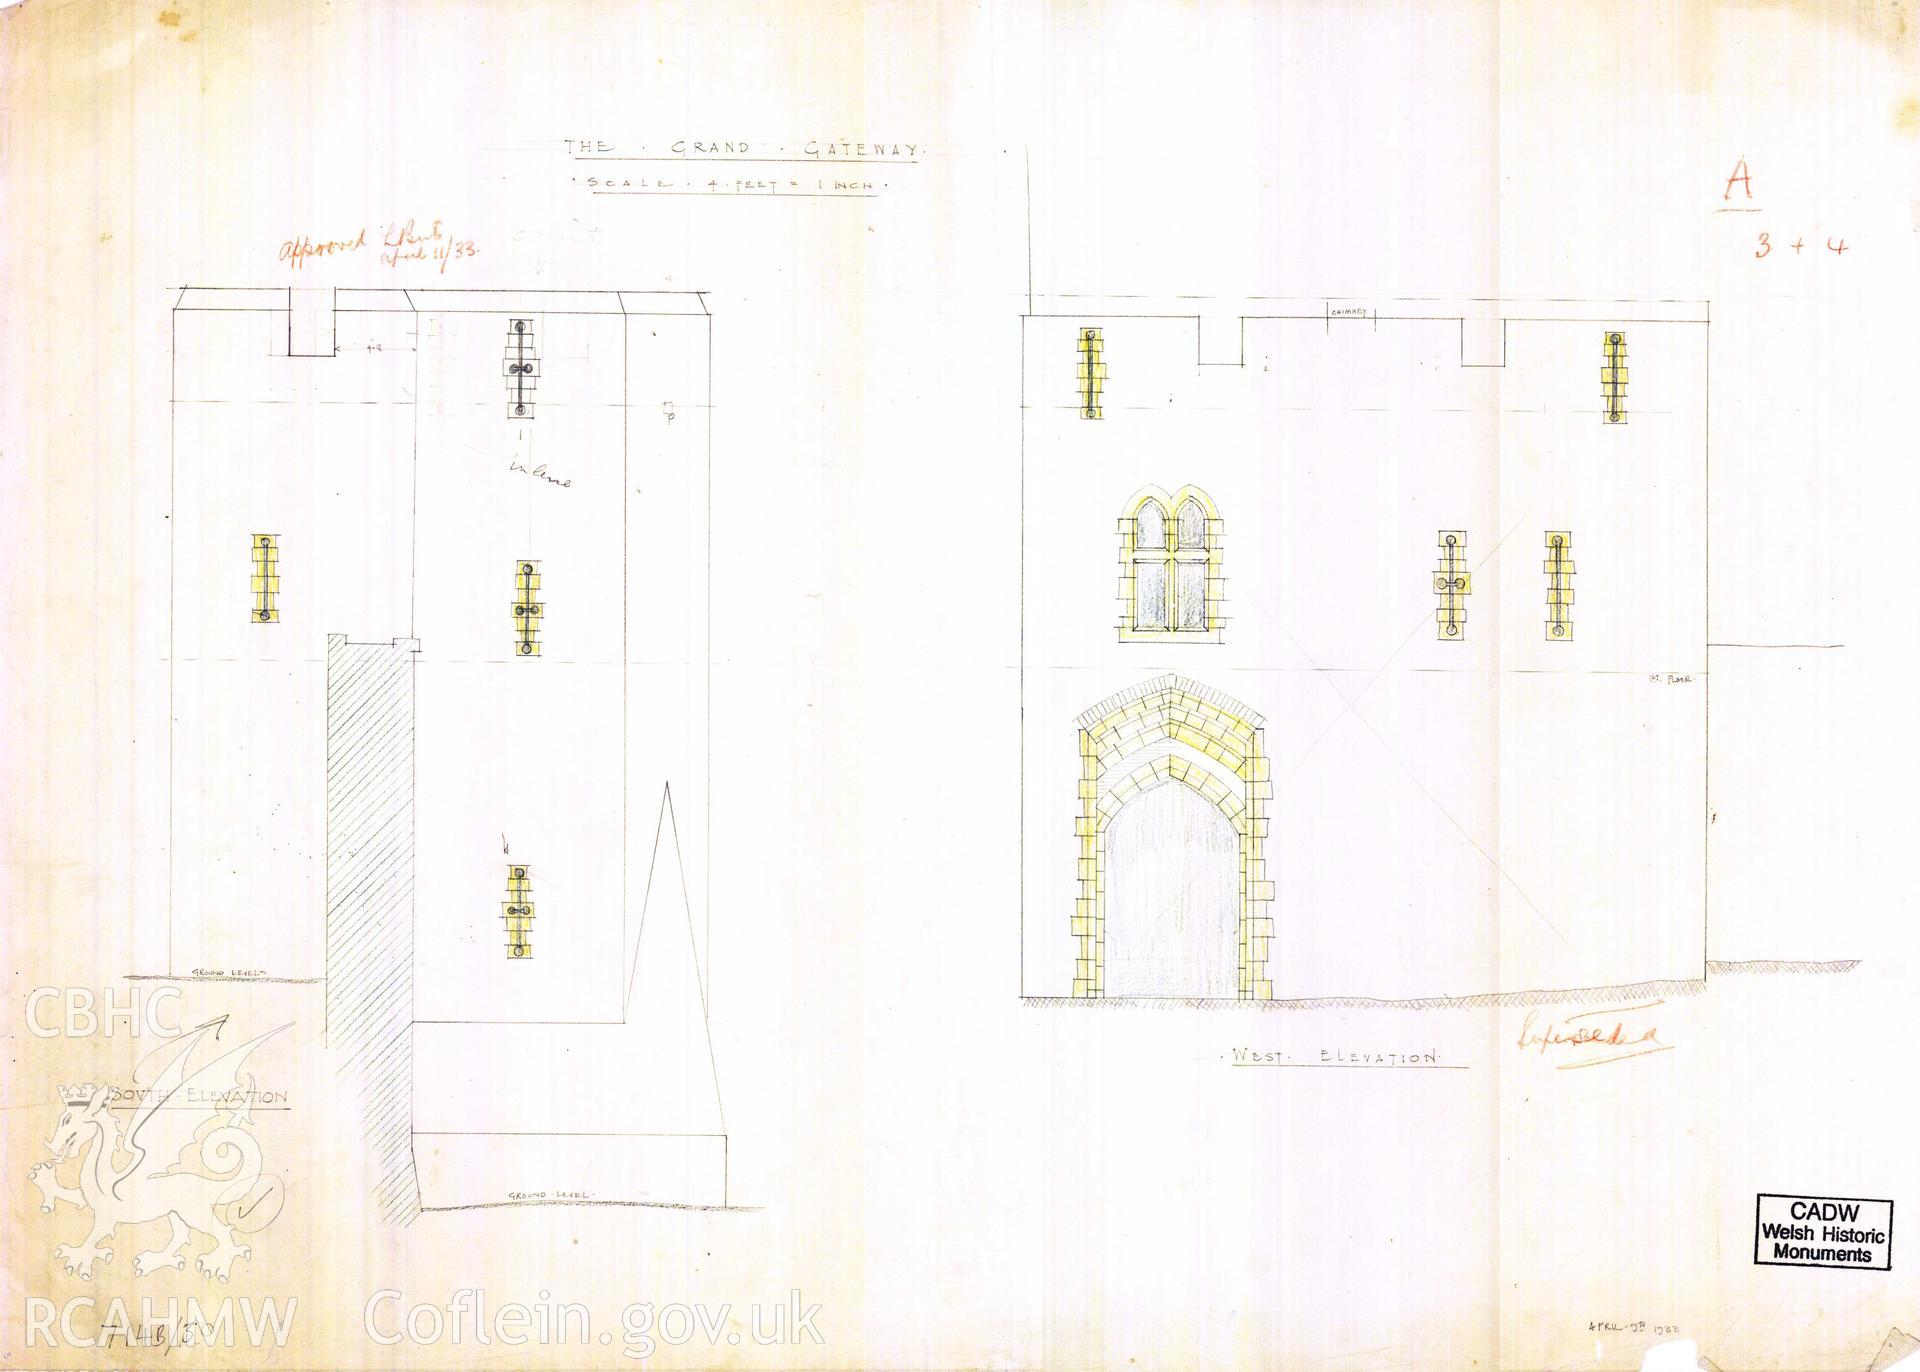 Cadw guardianship monument drawing of Caerphilly Castle. Outer E gate, S+W (int) elevs. Cadw ref. no: 714B/30. Scale 1:48.